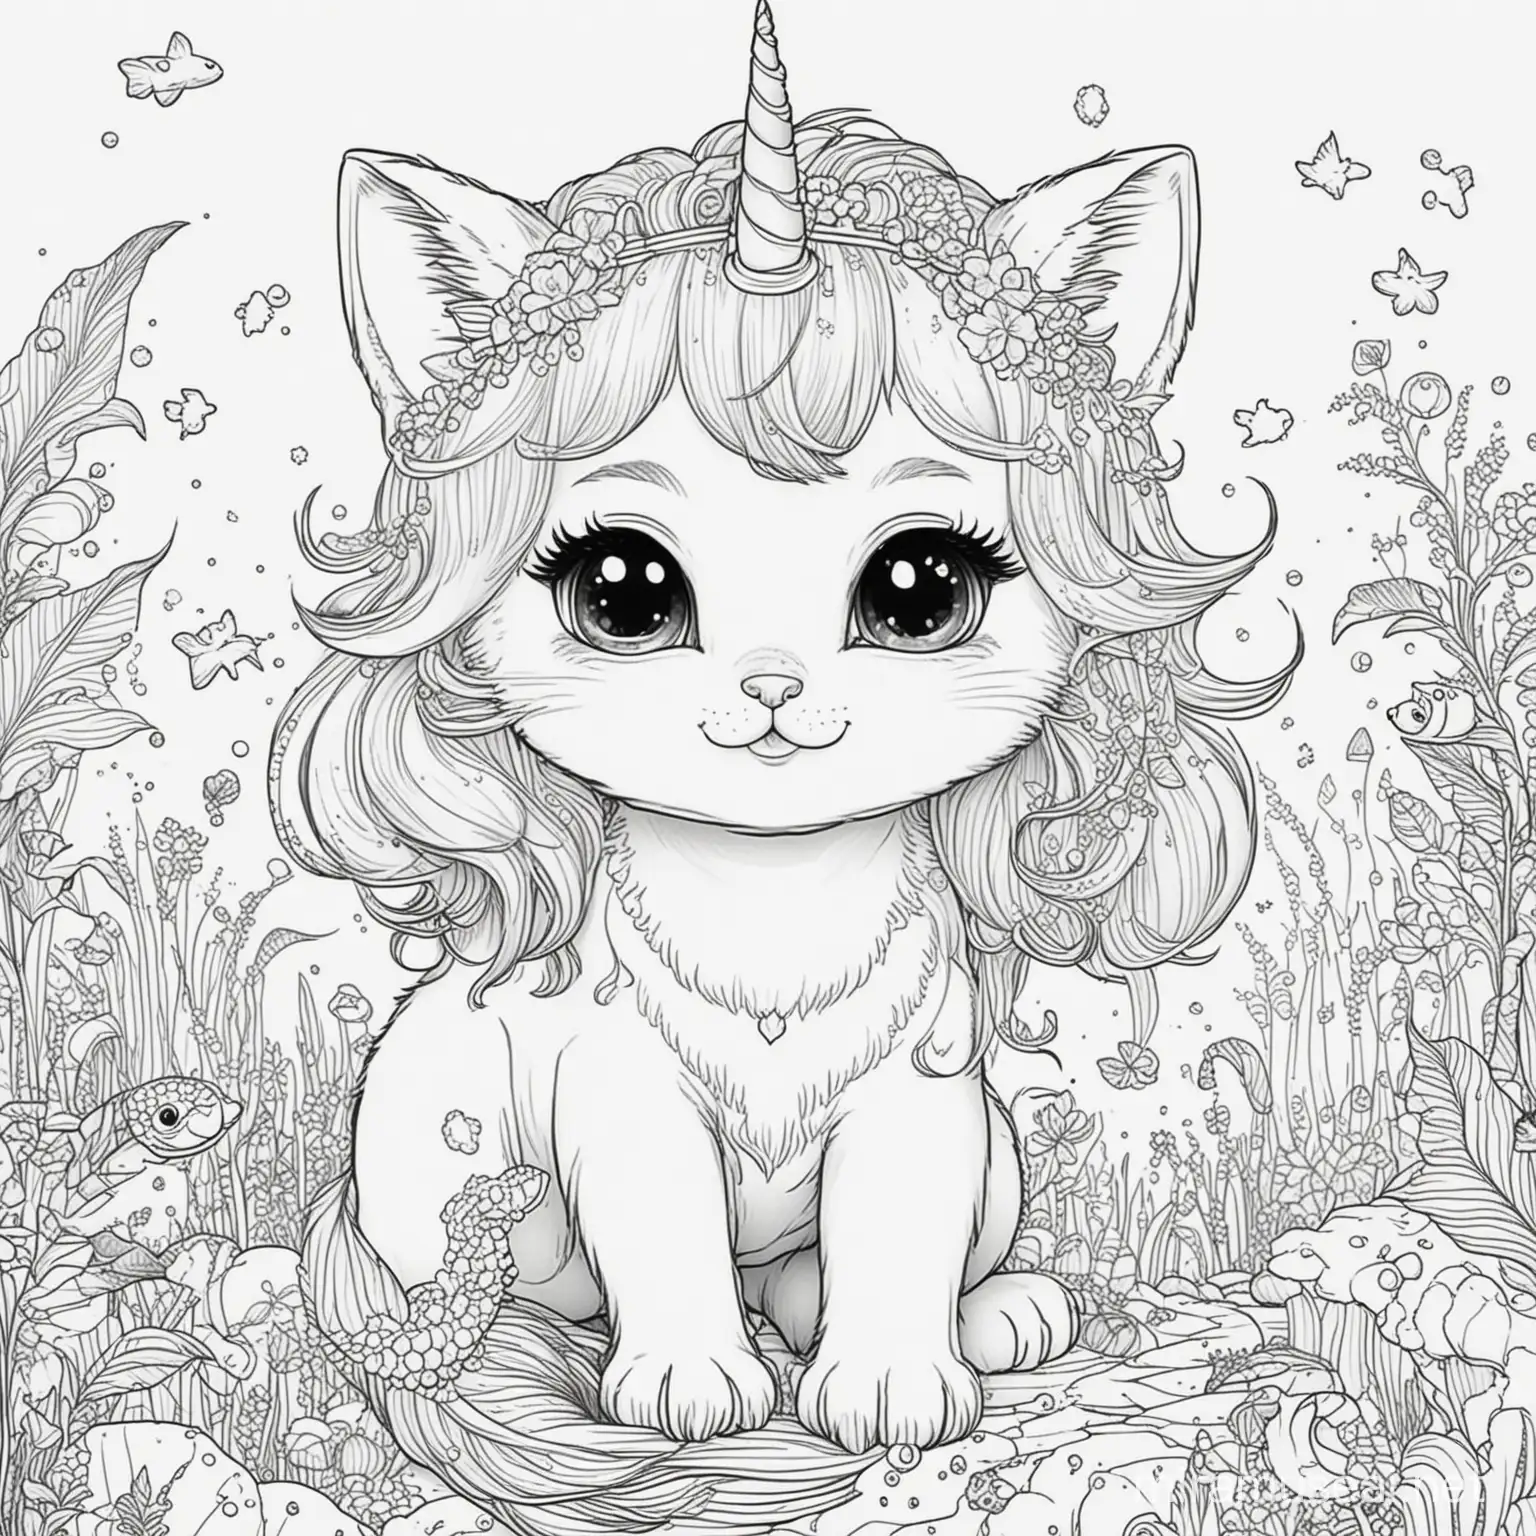 black and white coloring page for kids cartoon style cute kitten with mermaid and unicorn features --ar 4:5